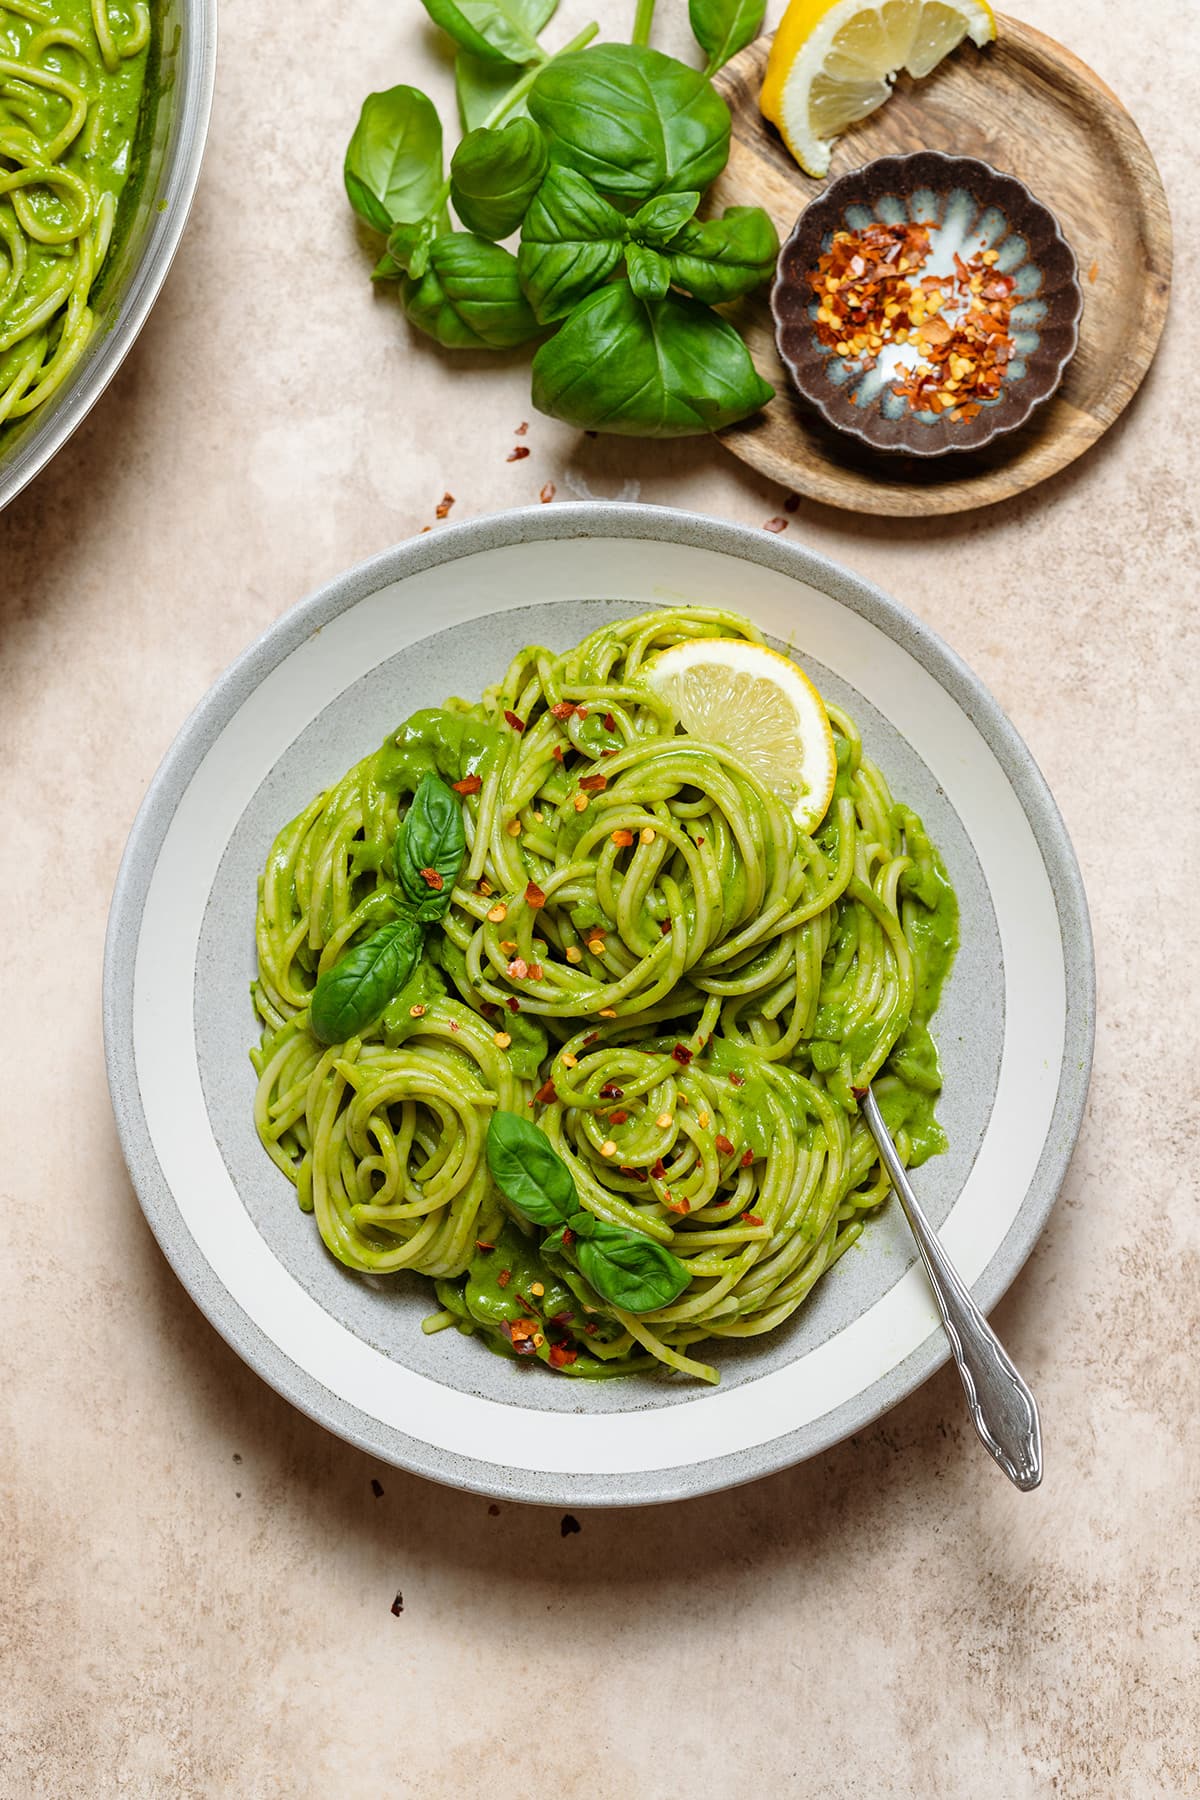 Spaghetti with green sauce in a low grey bowl garnished with fresh basil, chili flakes, and lemon.